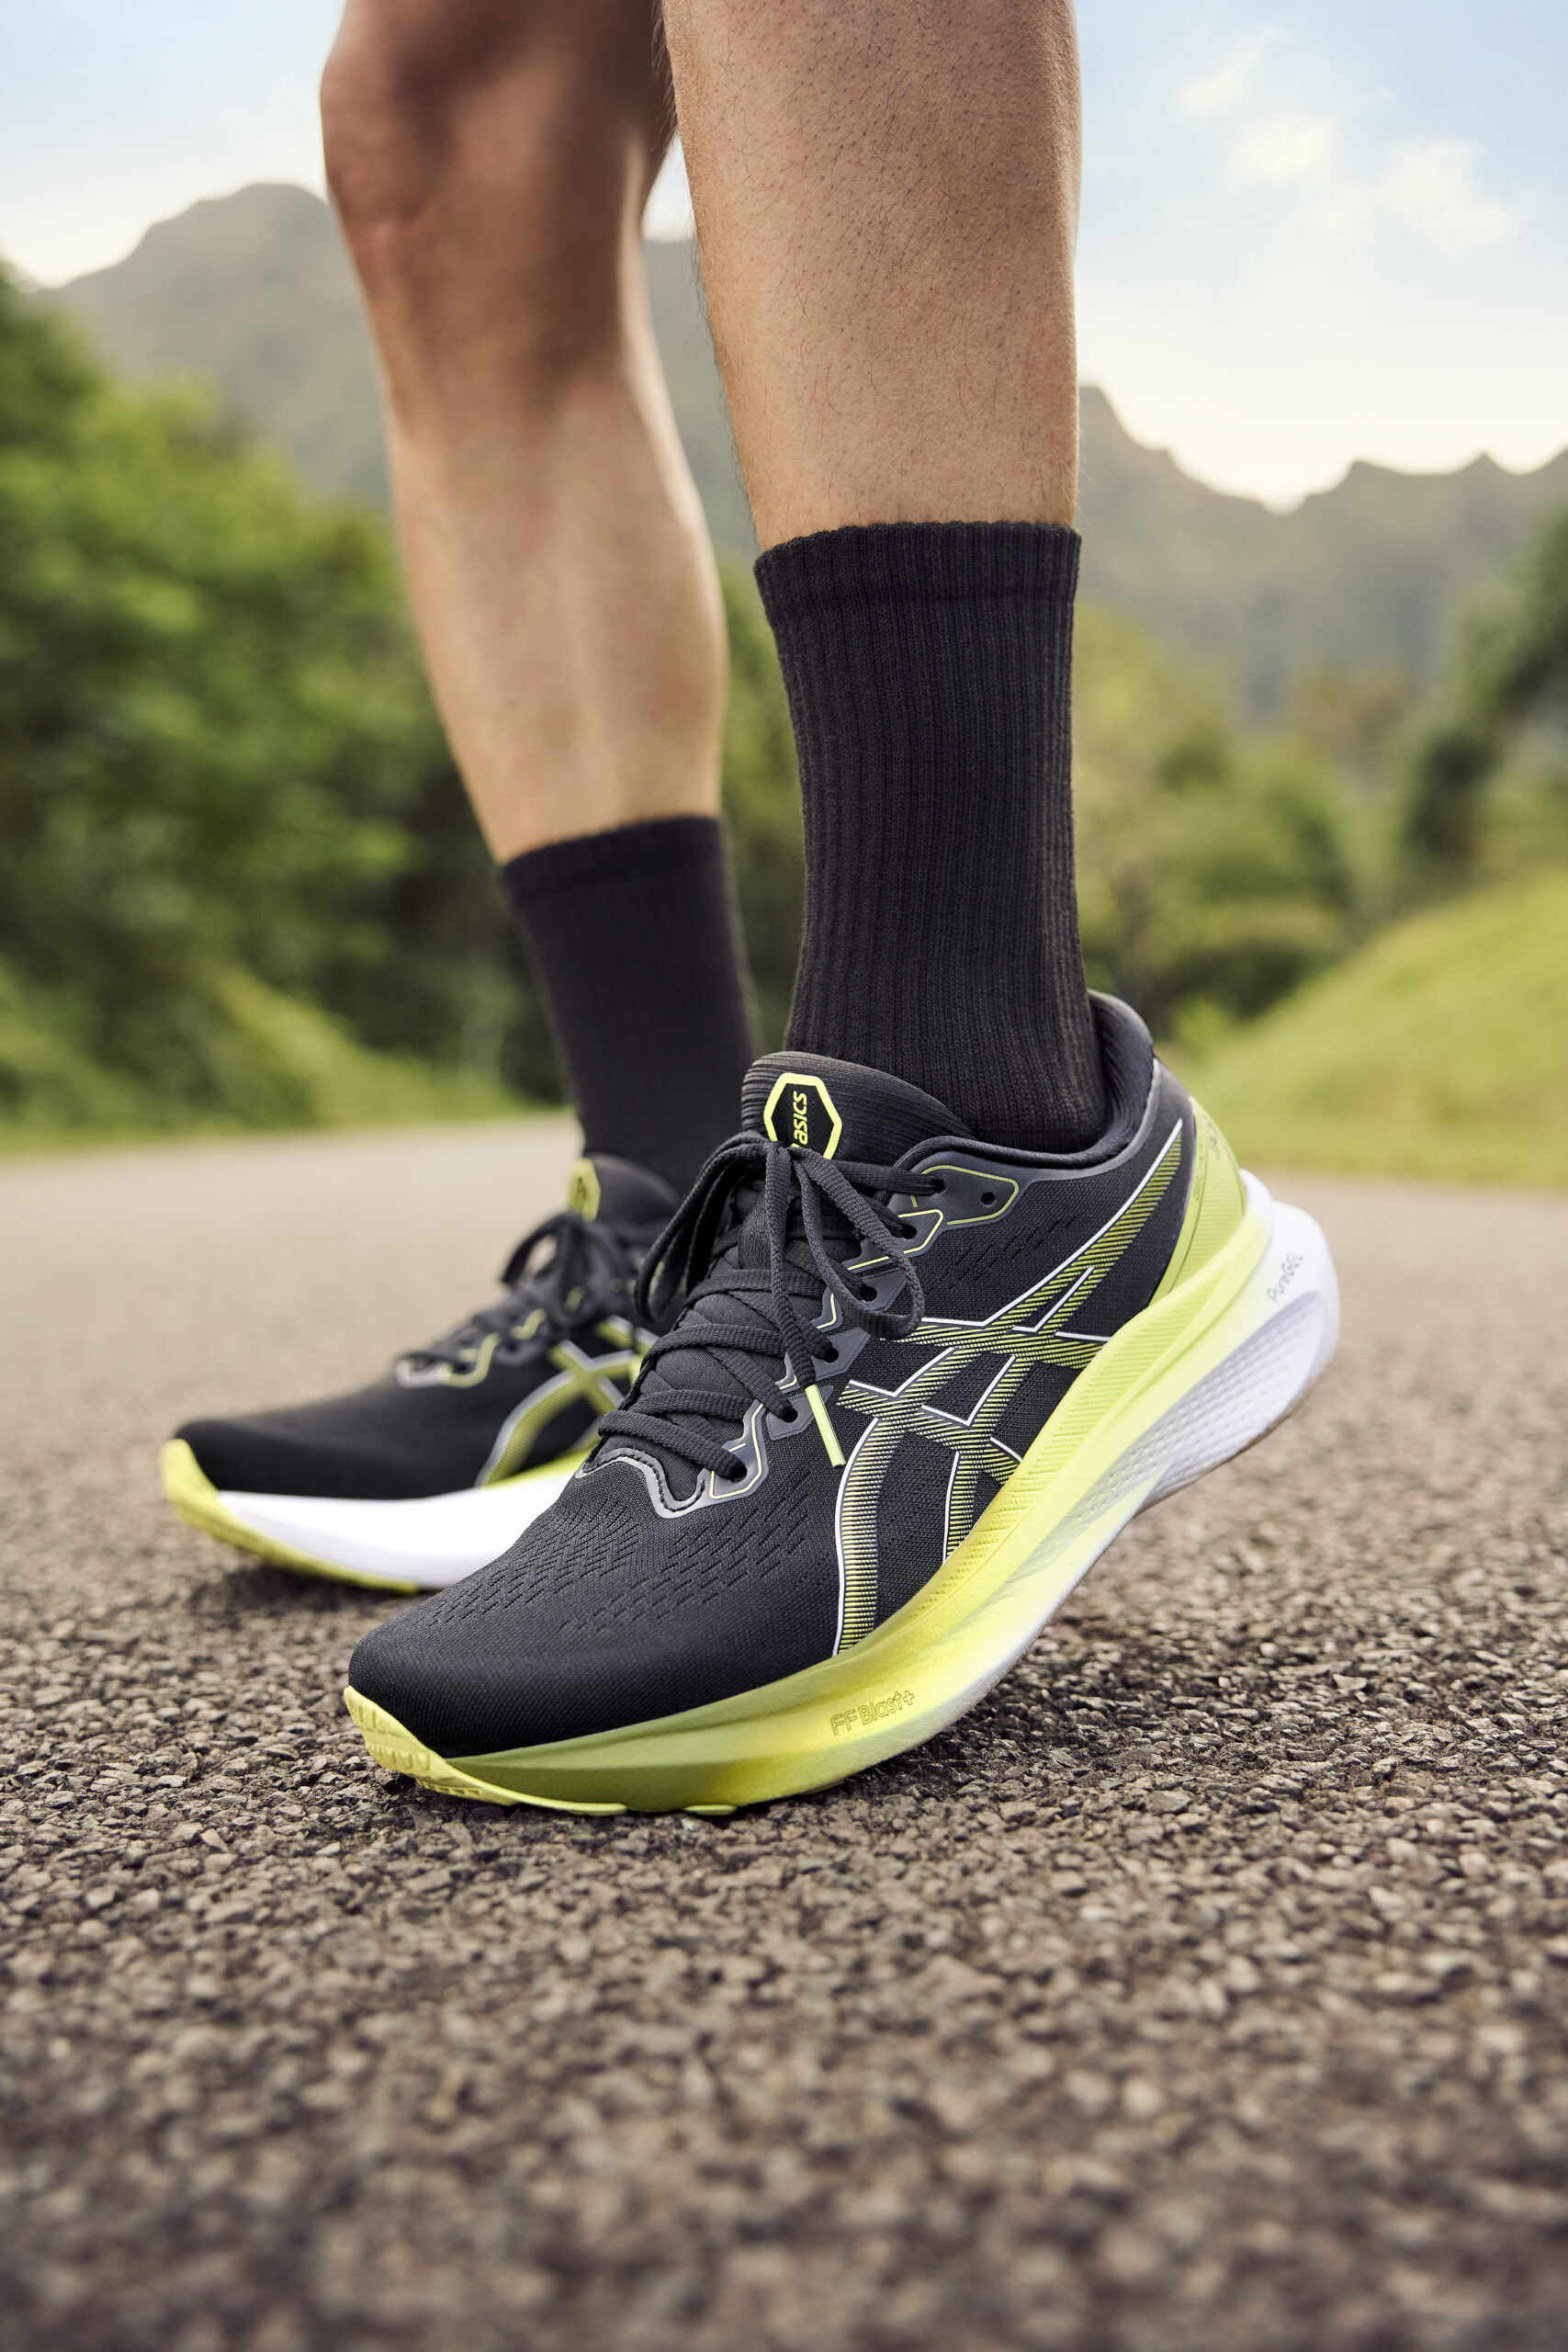 ASICS Launches GEL-KAYANO 30 - The Pill Outdoor Journal